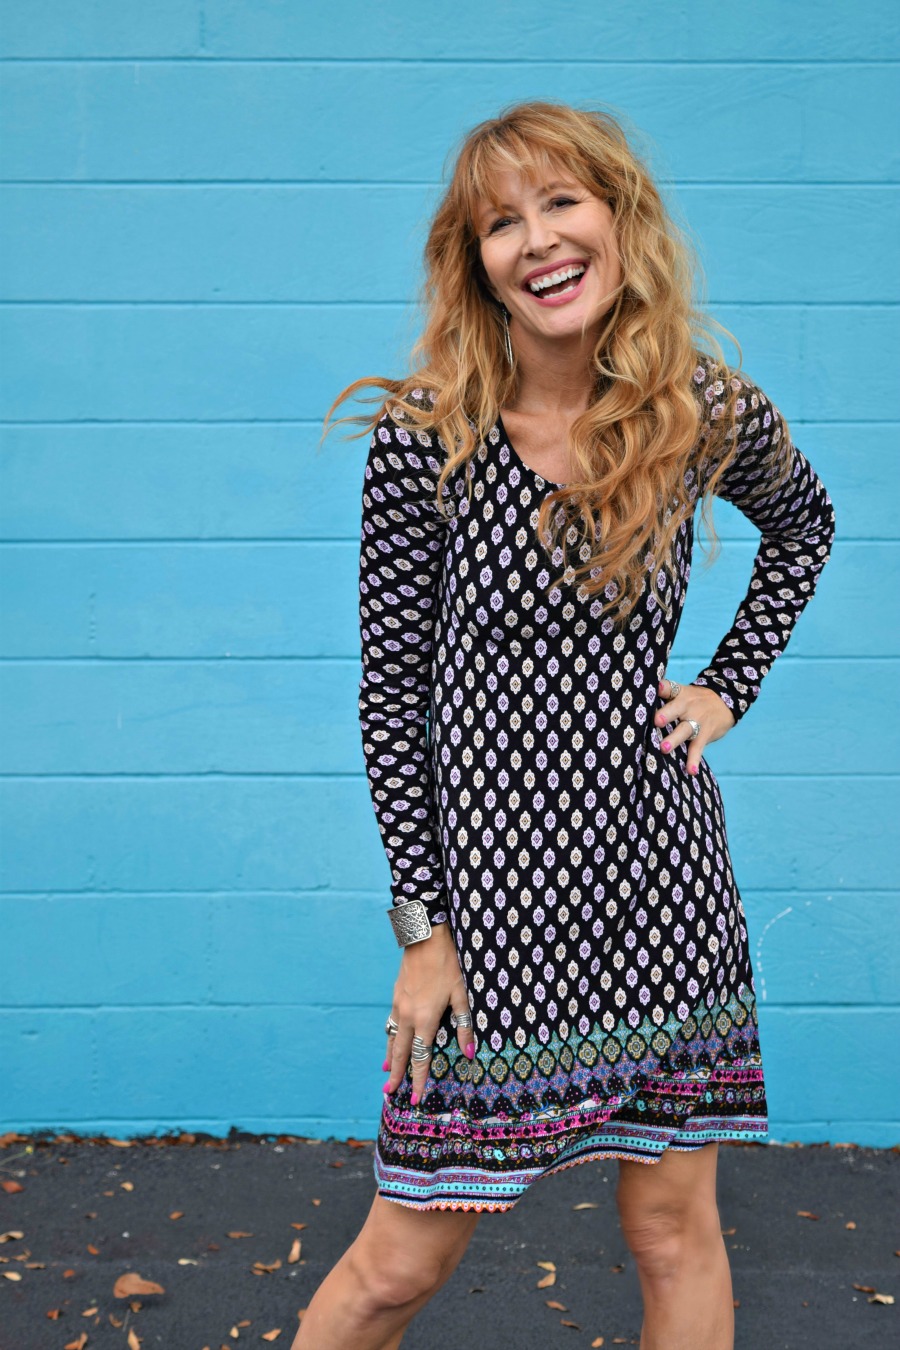 5 Tips to rock your StitchFix experience